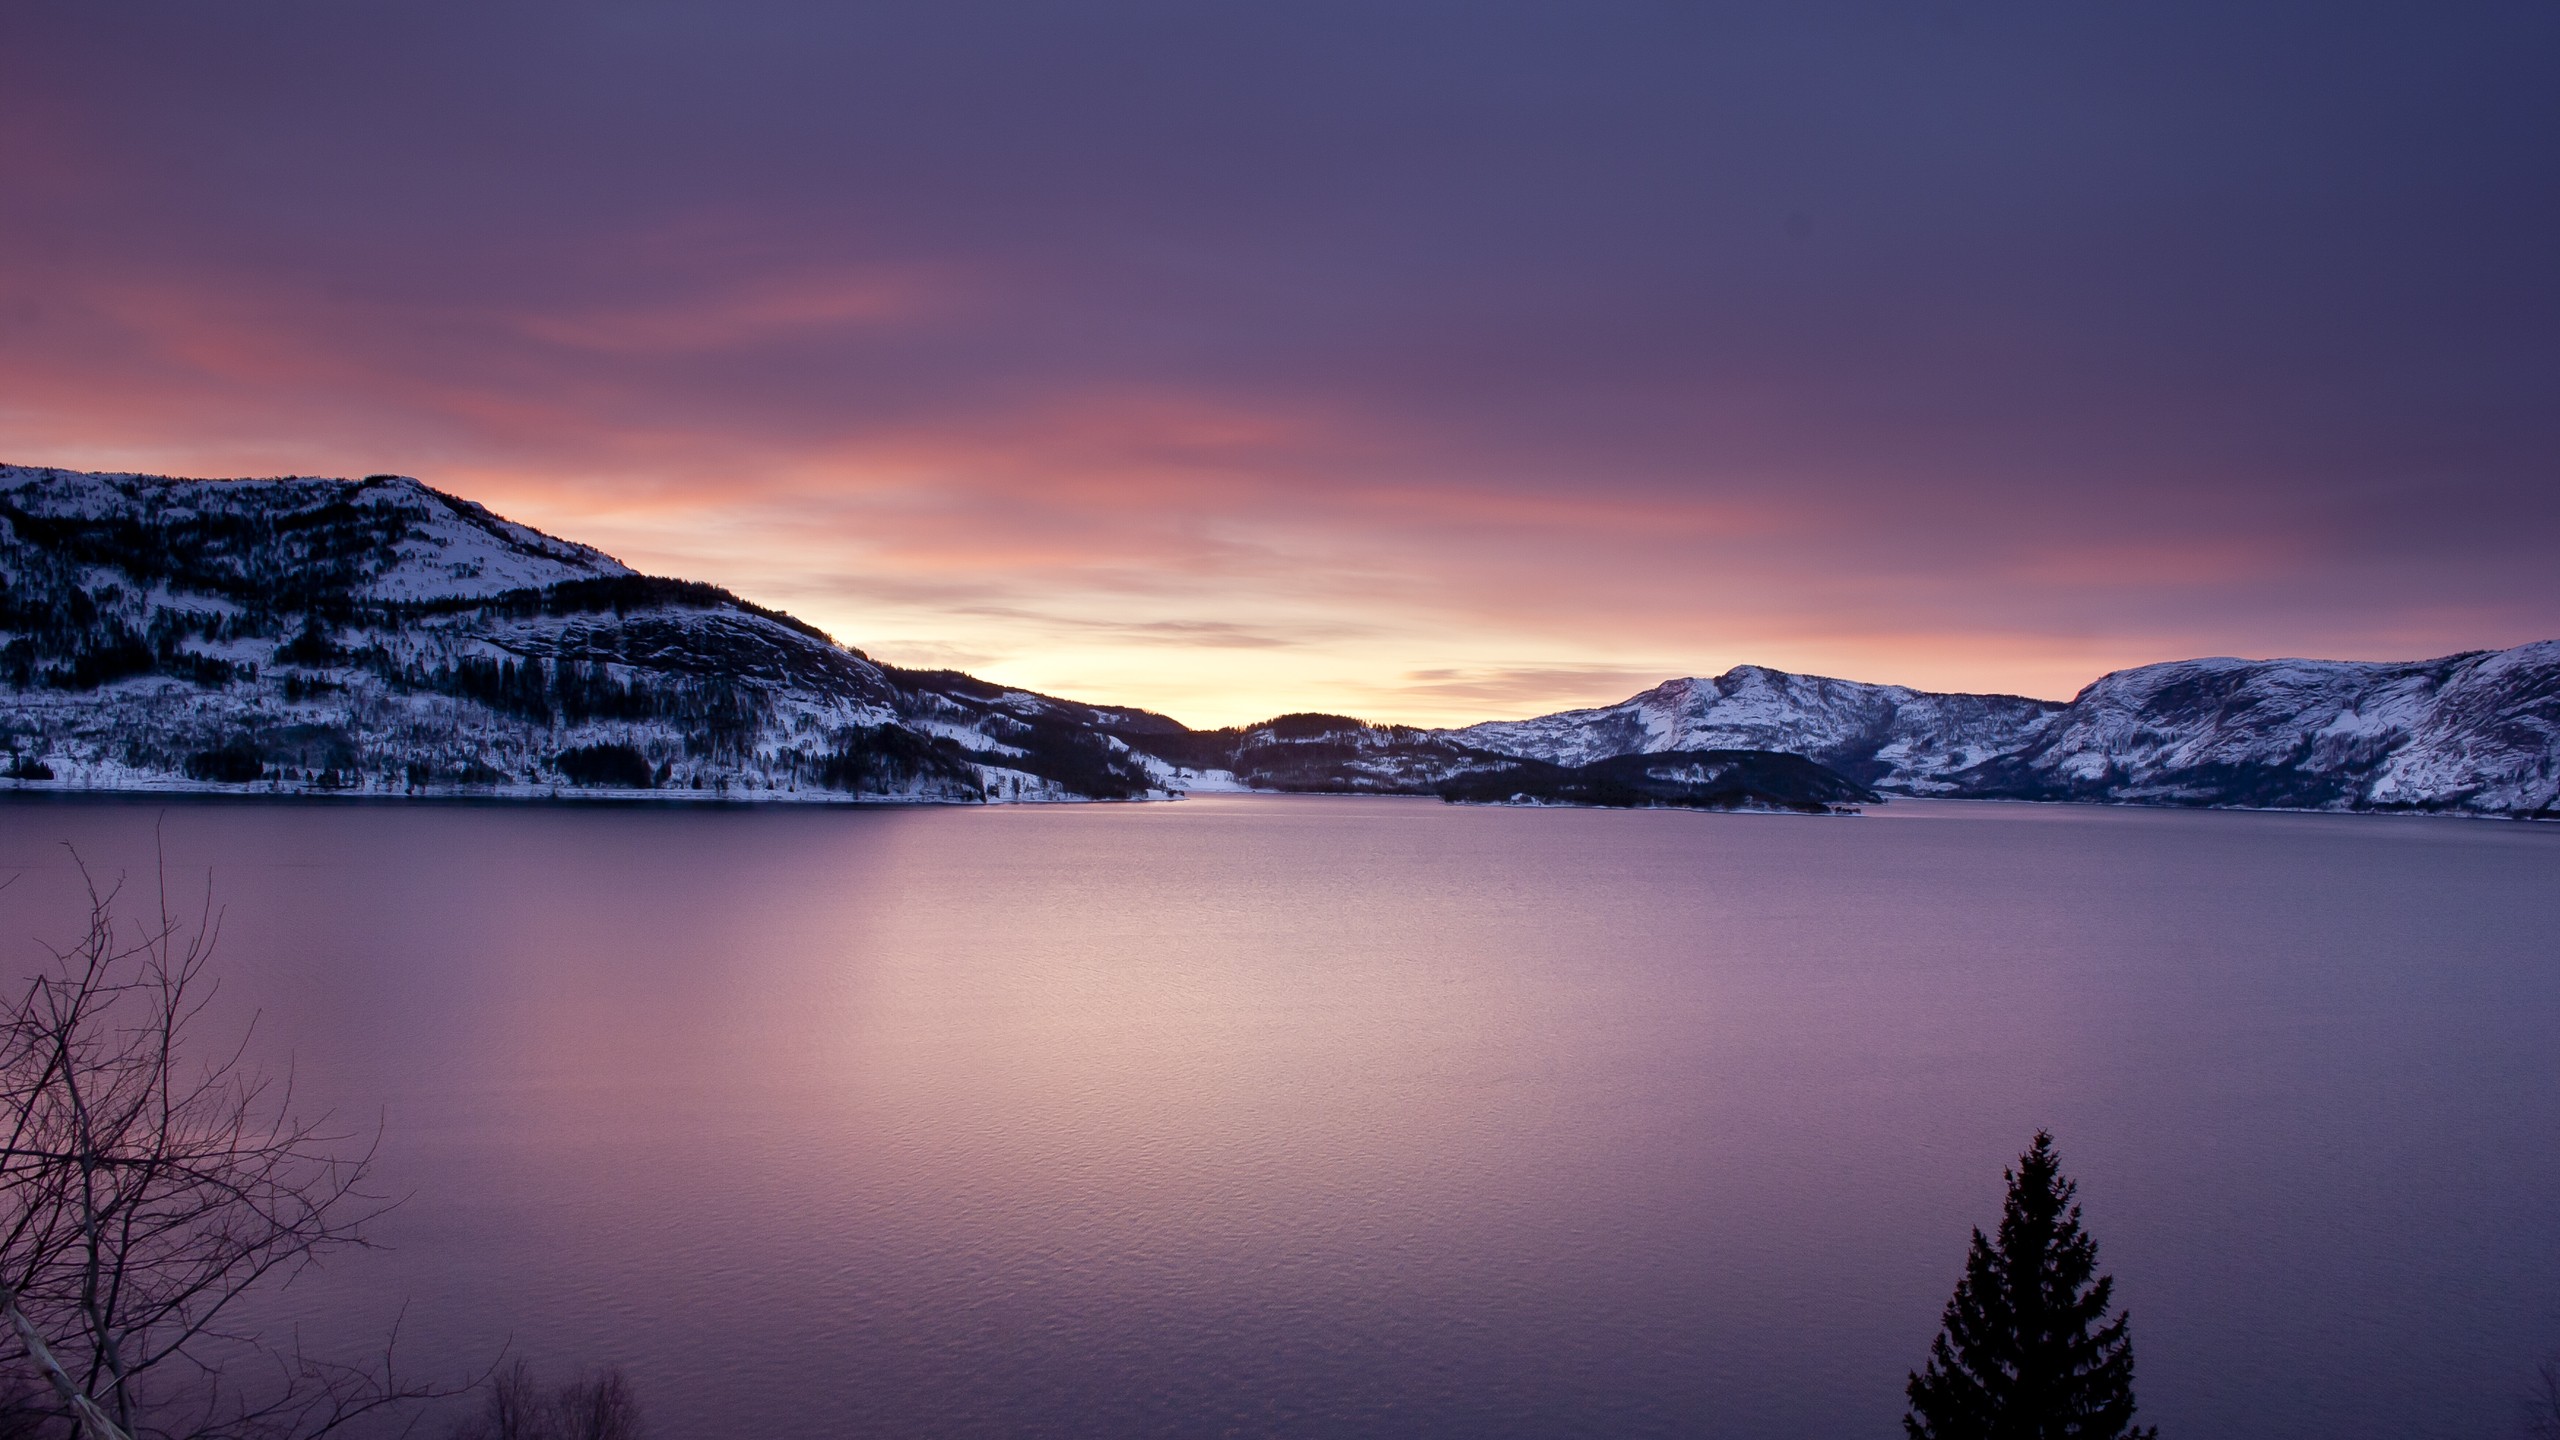 General 2560x1440 water winter sky landscape cold outdoors nature Norway